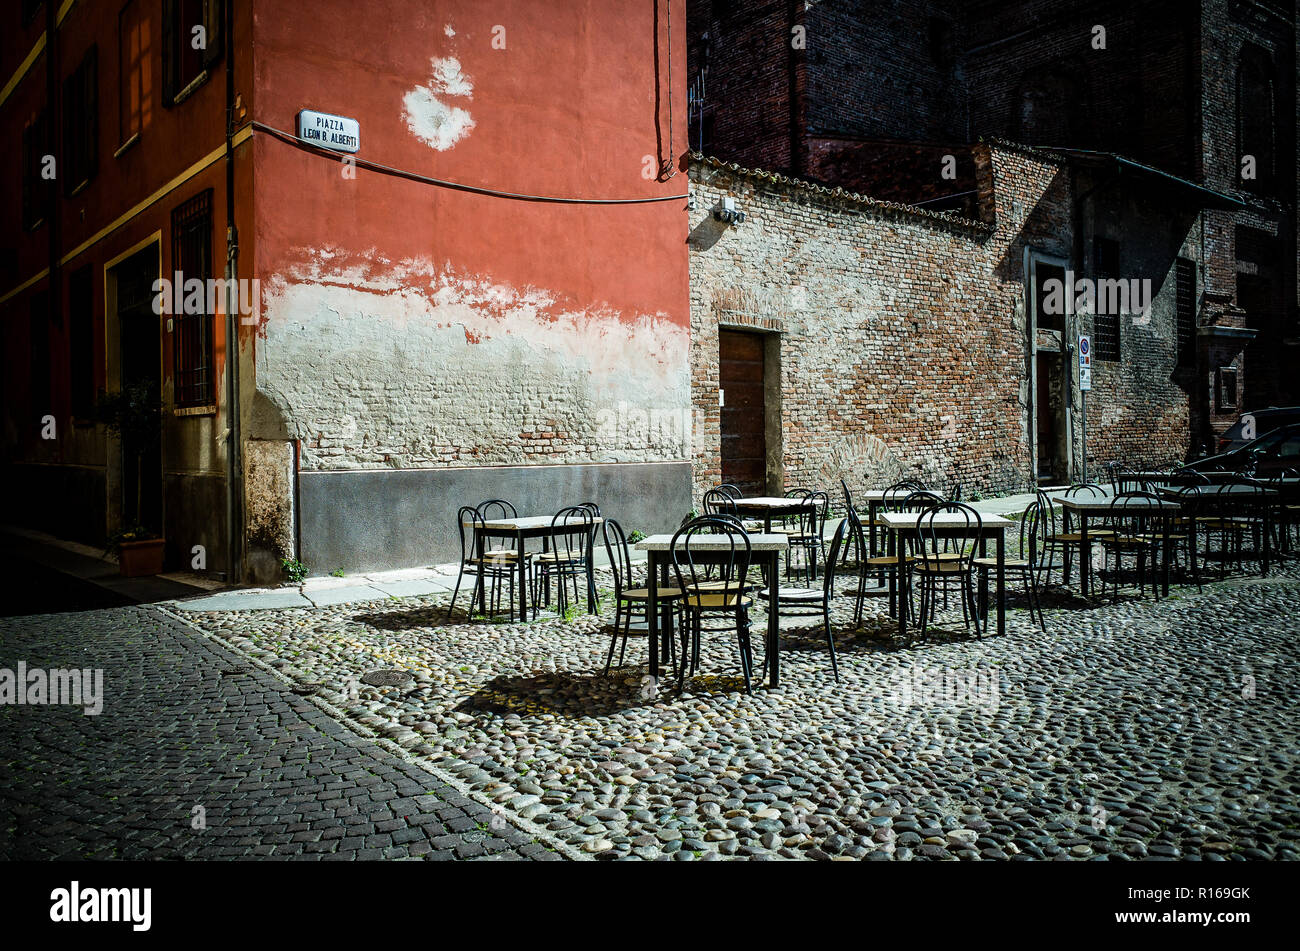 Outdoor space of a café in the historical district of Mantova, Italy Stock Photo